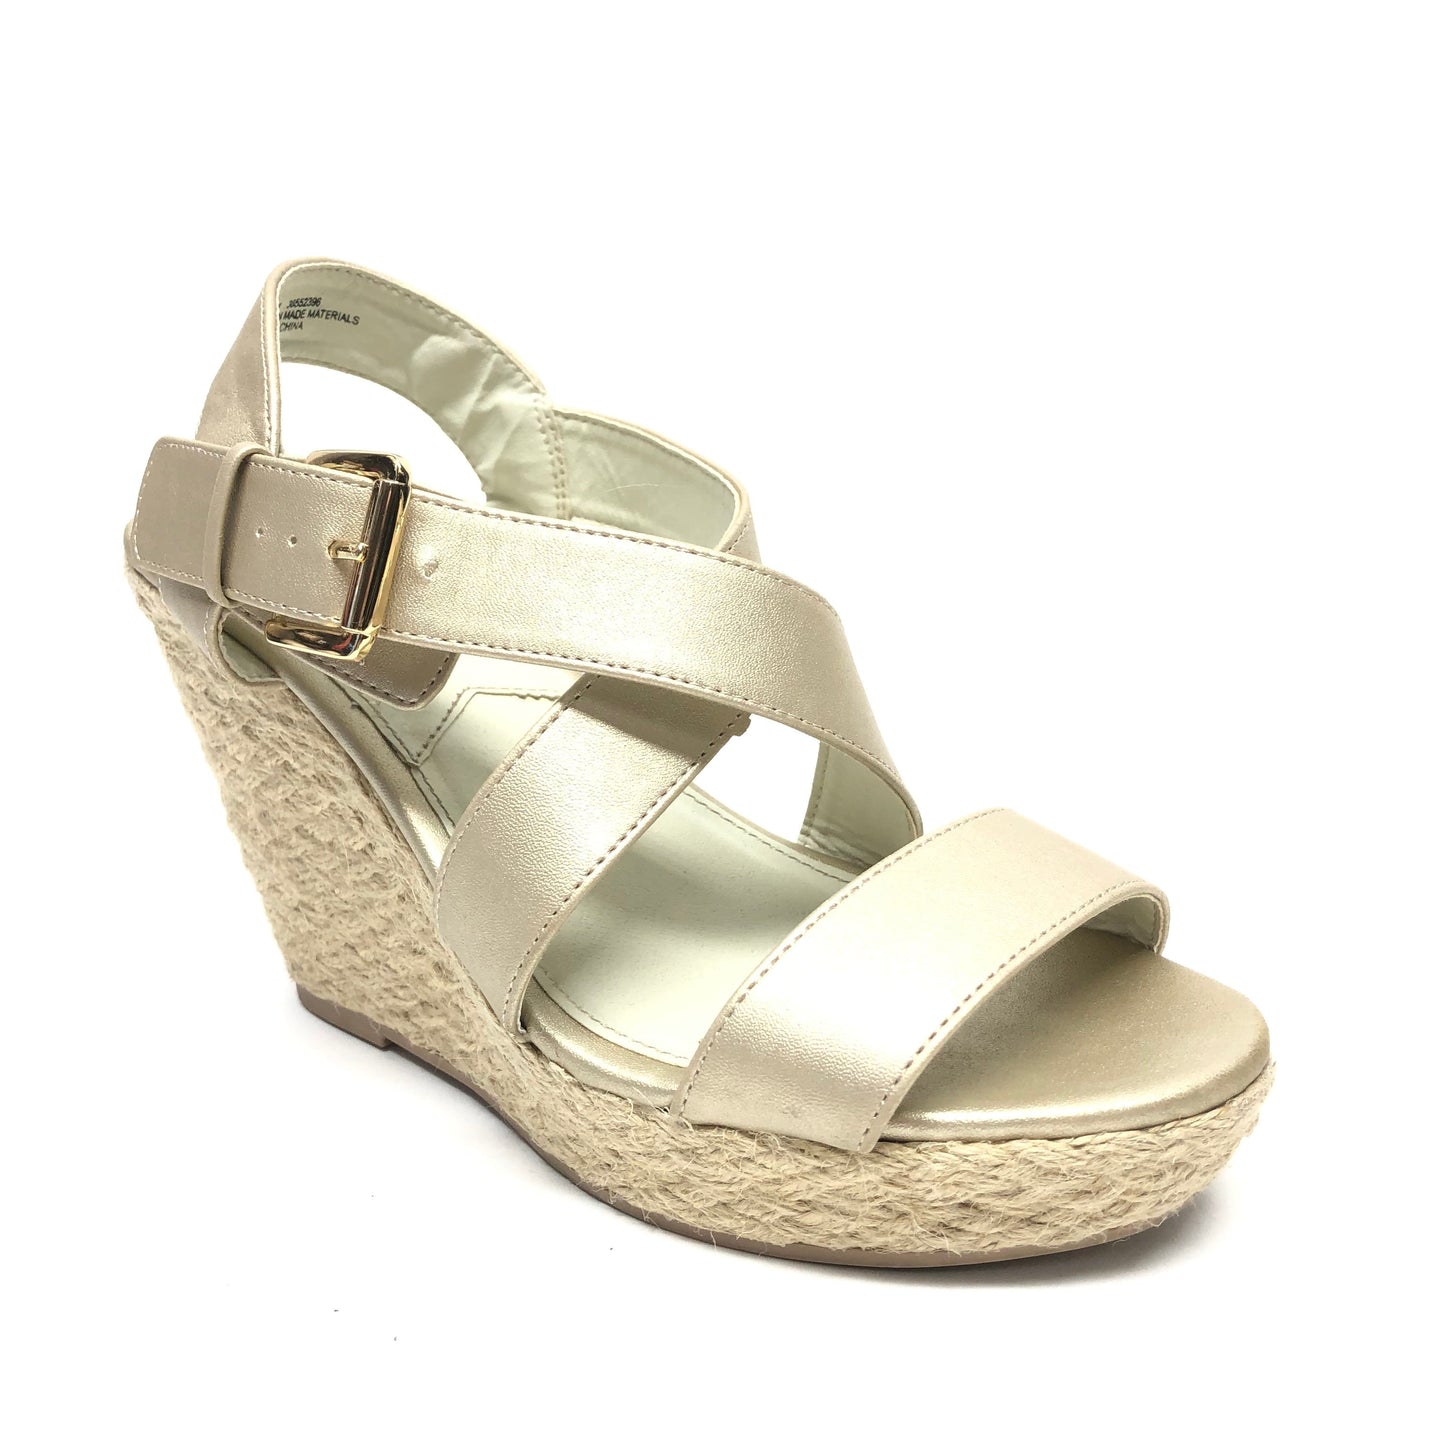 Sandals Heels Wedge By Cato  Size: 8